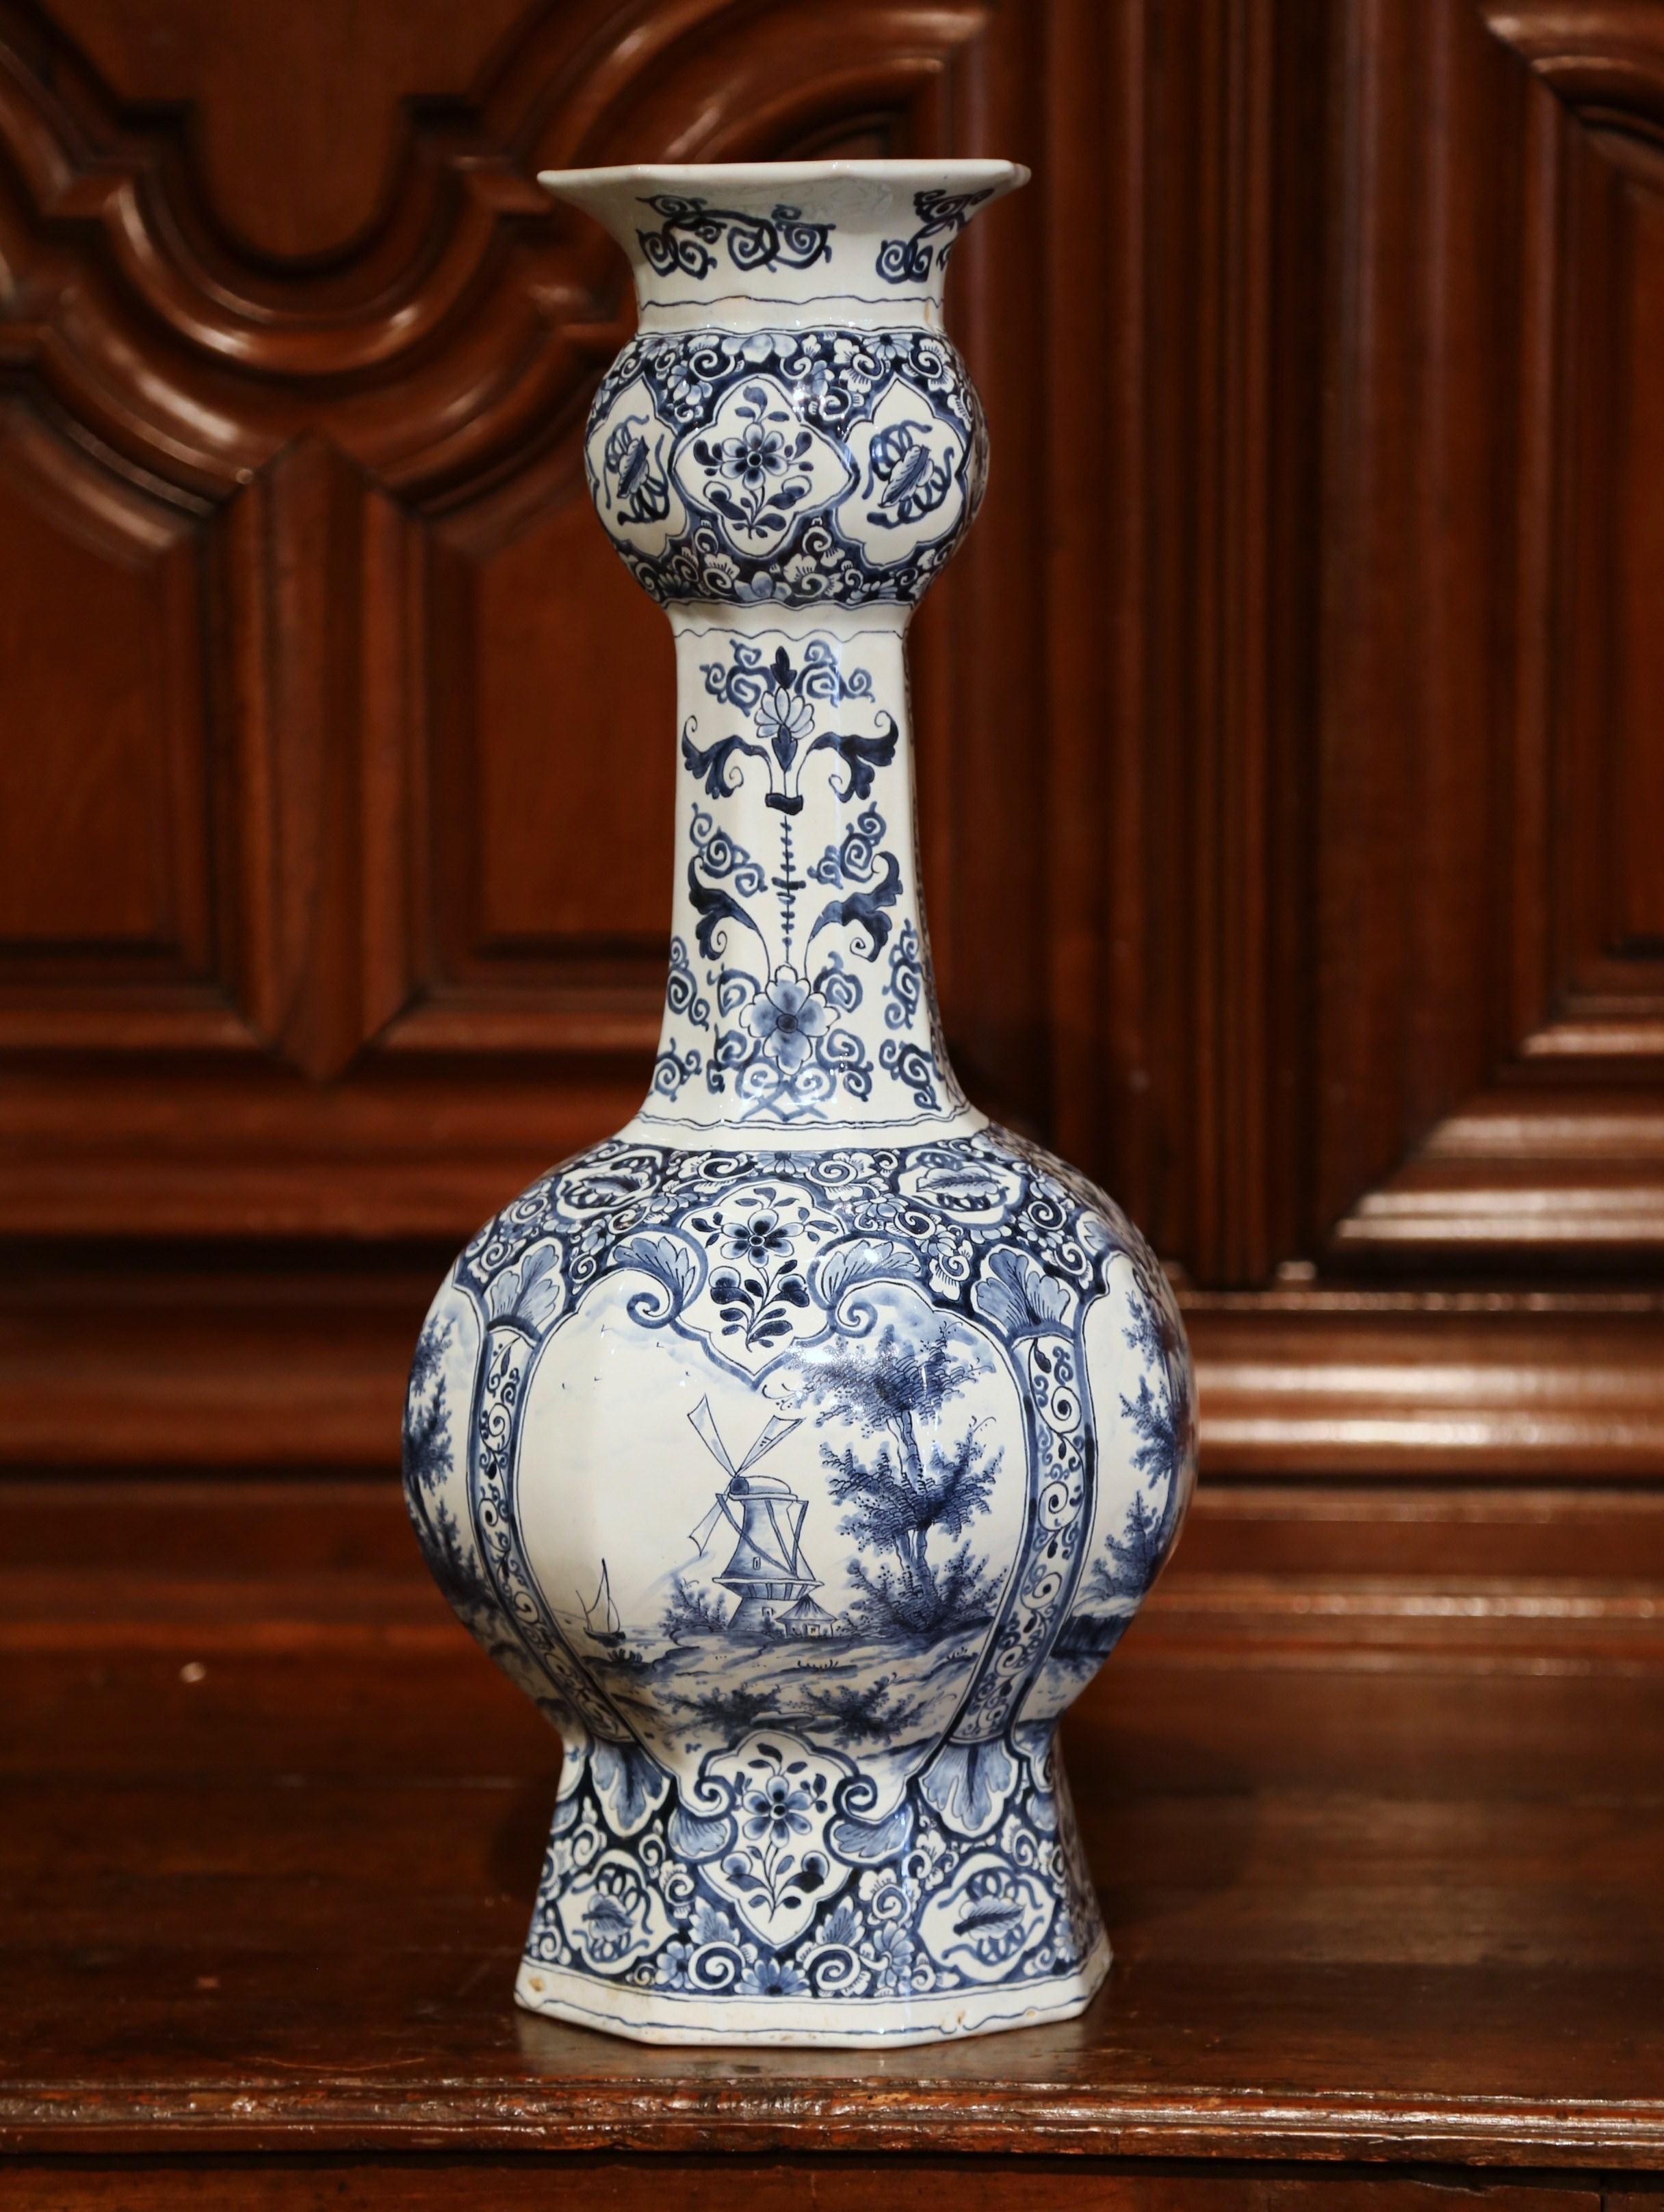 Faience 19th Century Dutch Blue and White Delft Vase with Courting and Windmill Scenes